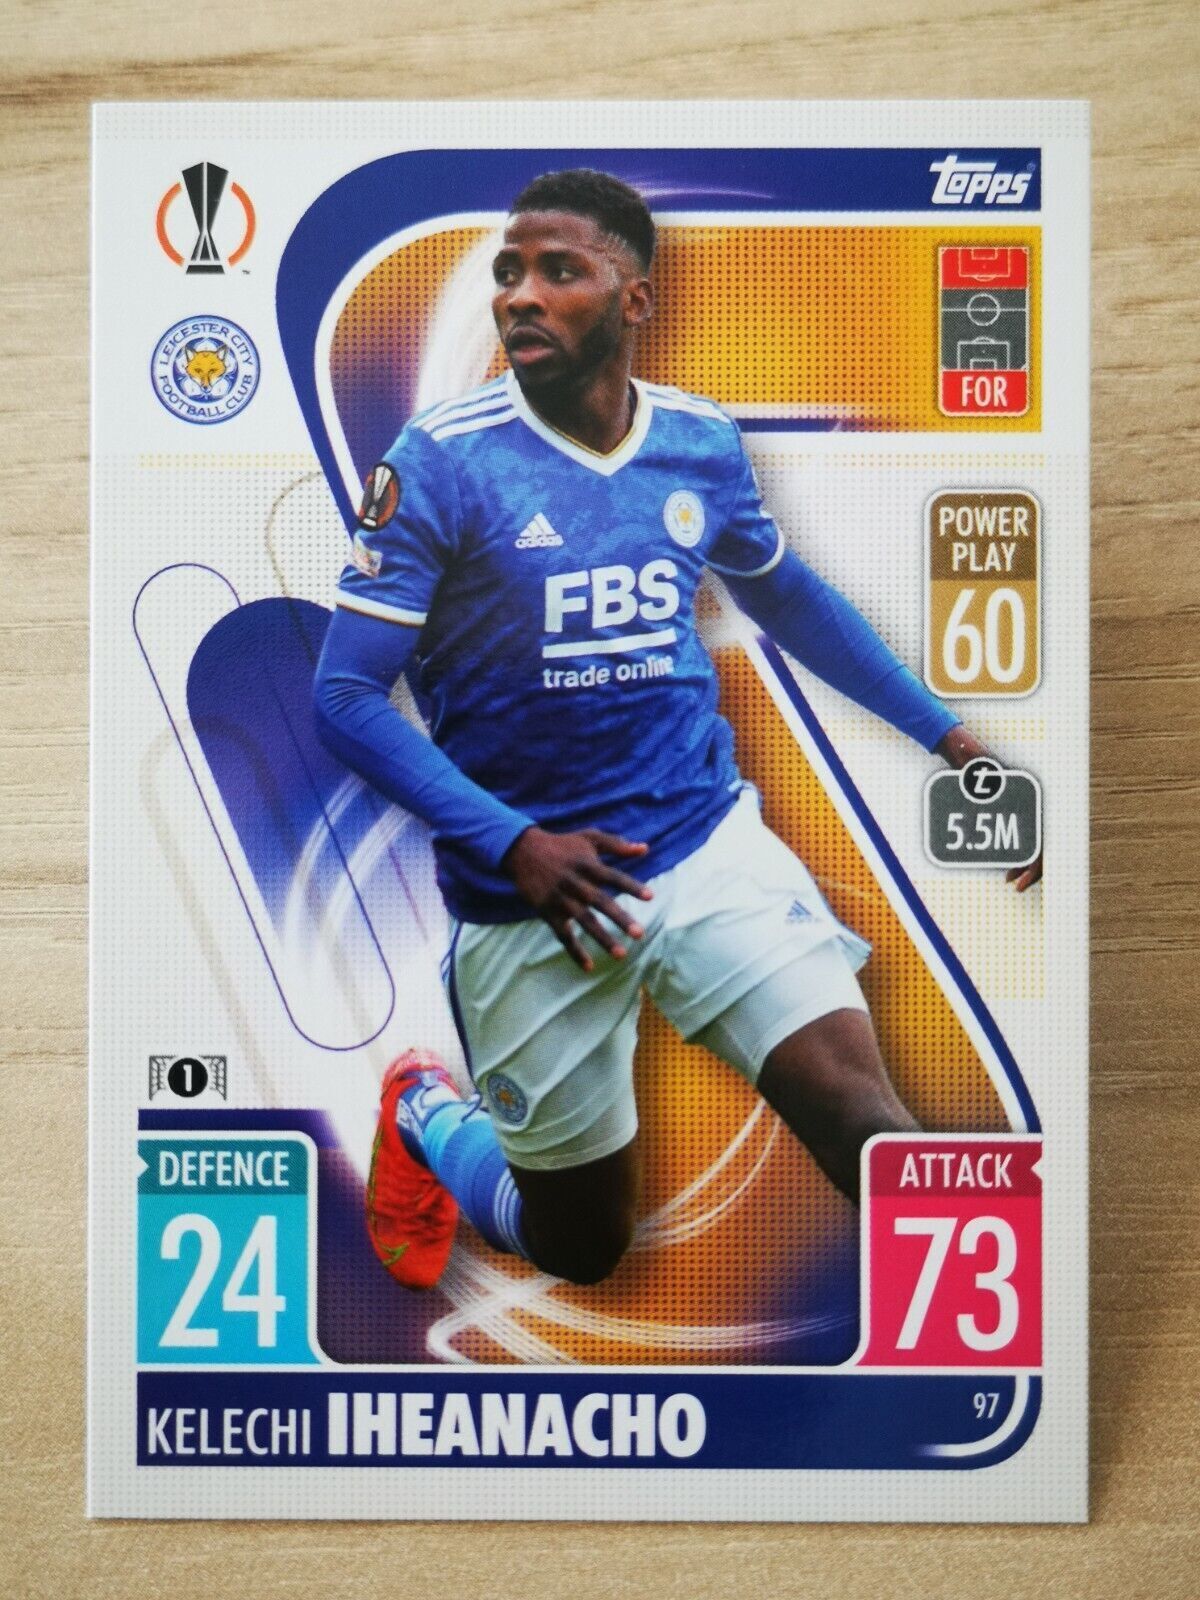 Topps C73 match attax 2021-22 champions league #97 Kelechi Iheanacho - Leicester